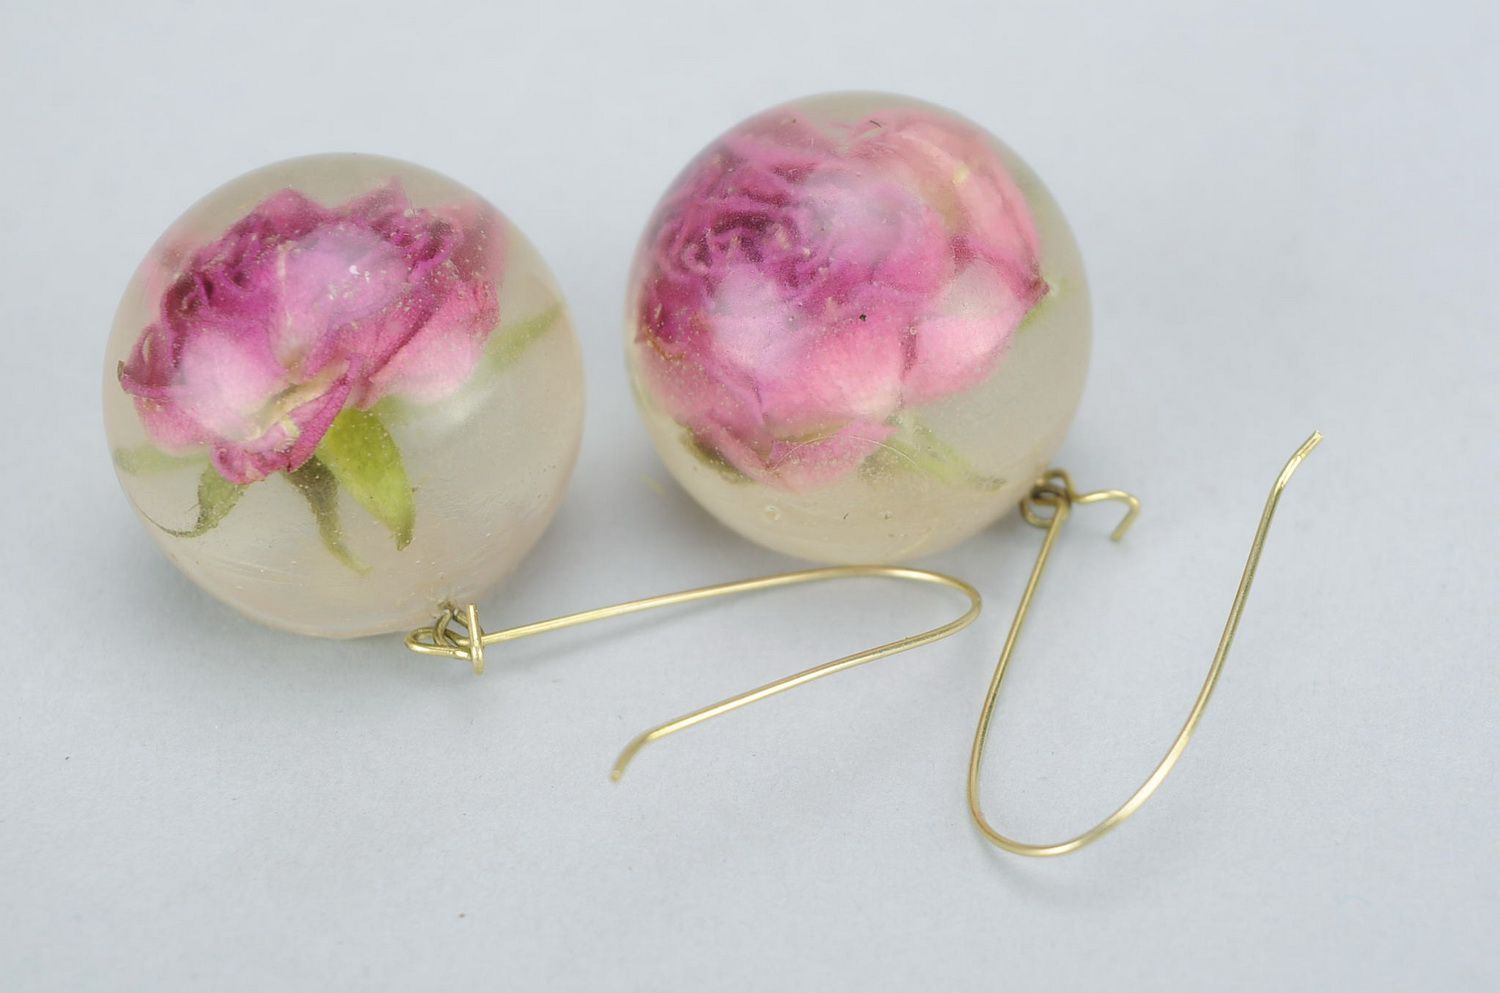 Golden earrings made from roses photo 4